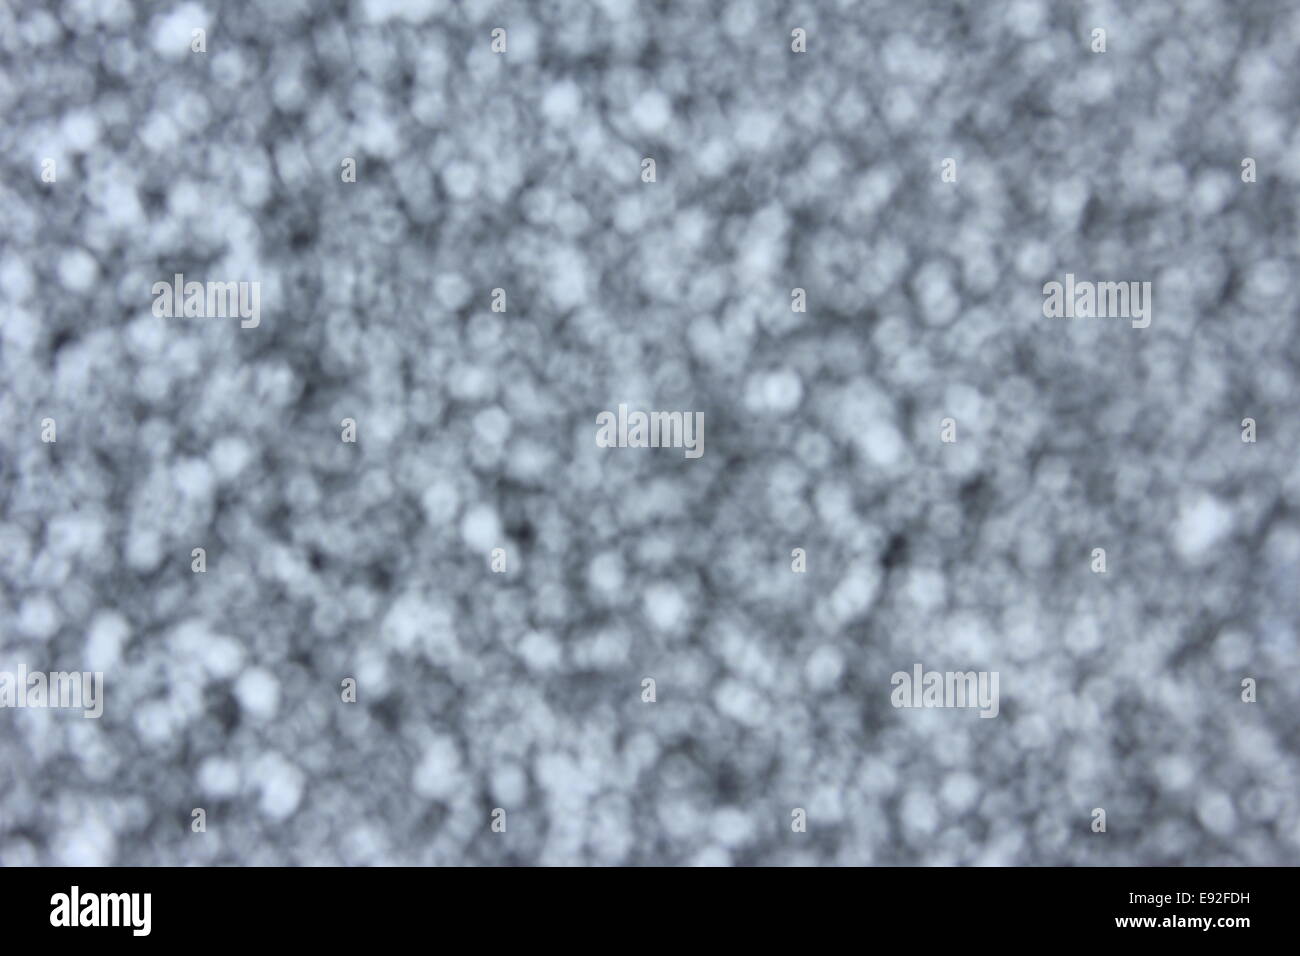 blurred silver-colored background Stock Photo